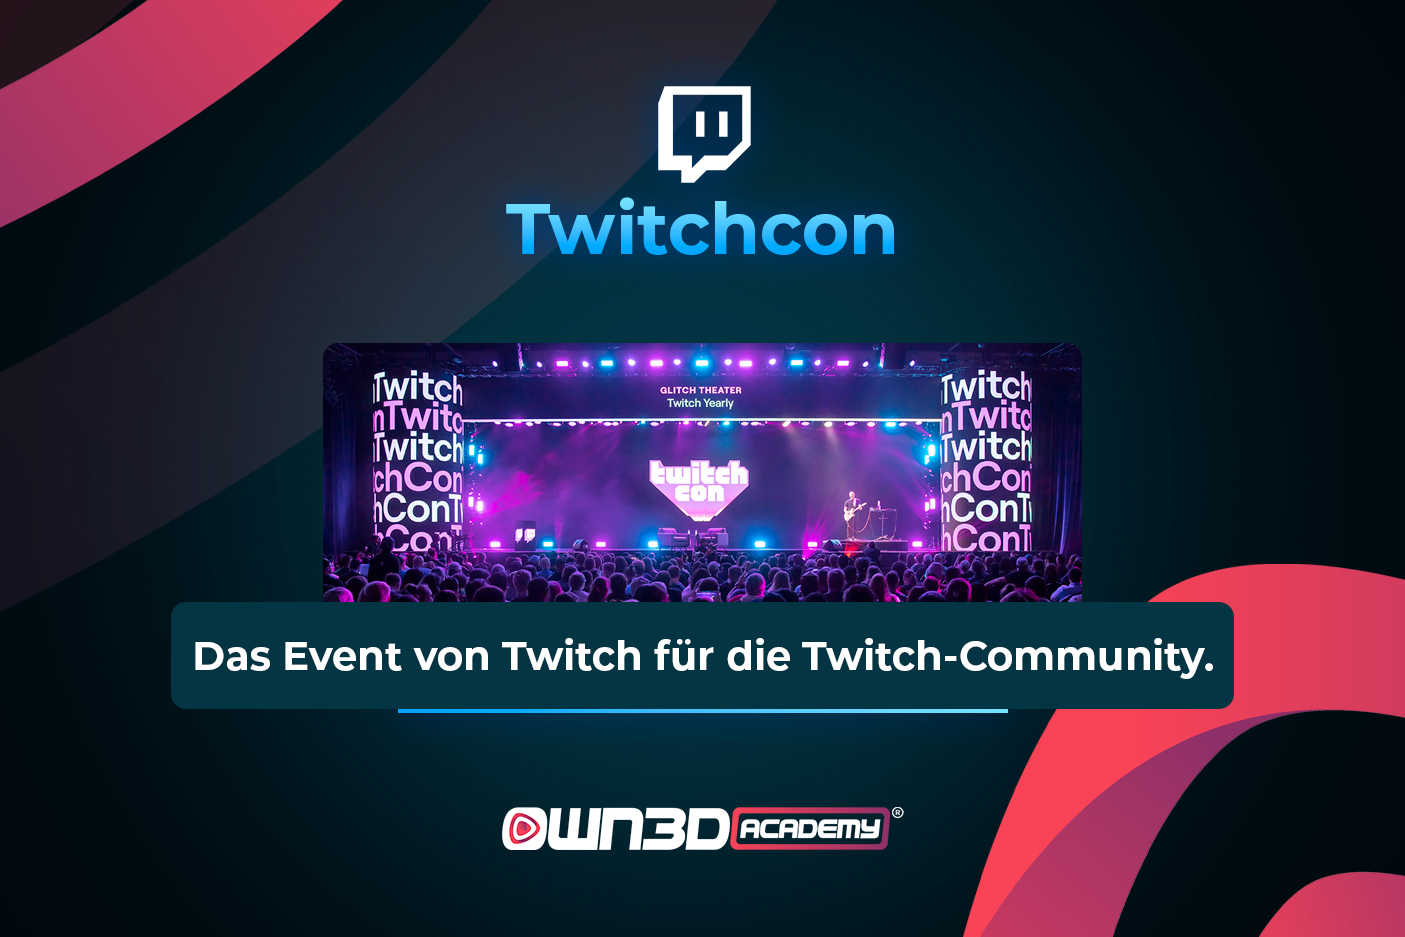 TWITCH_History-and-Keyfacts_GER_twitchcon.jpg